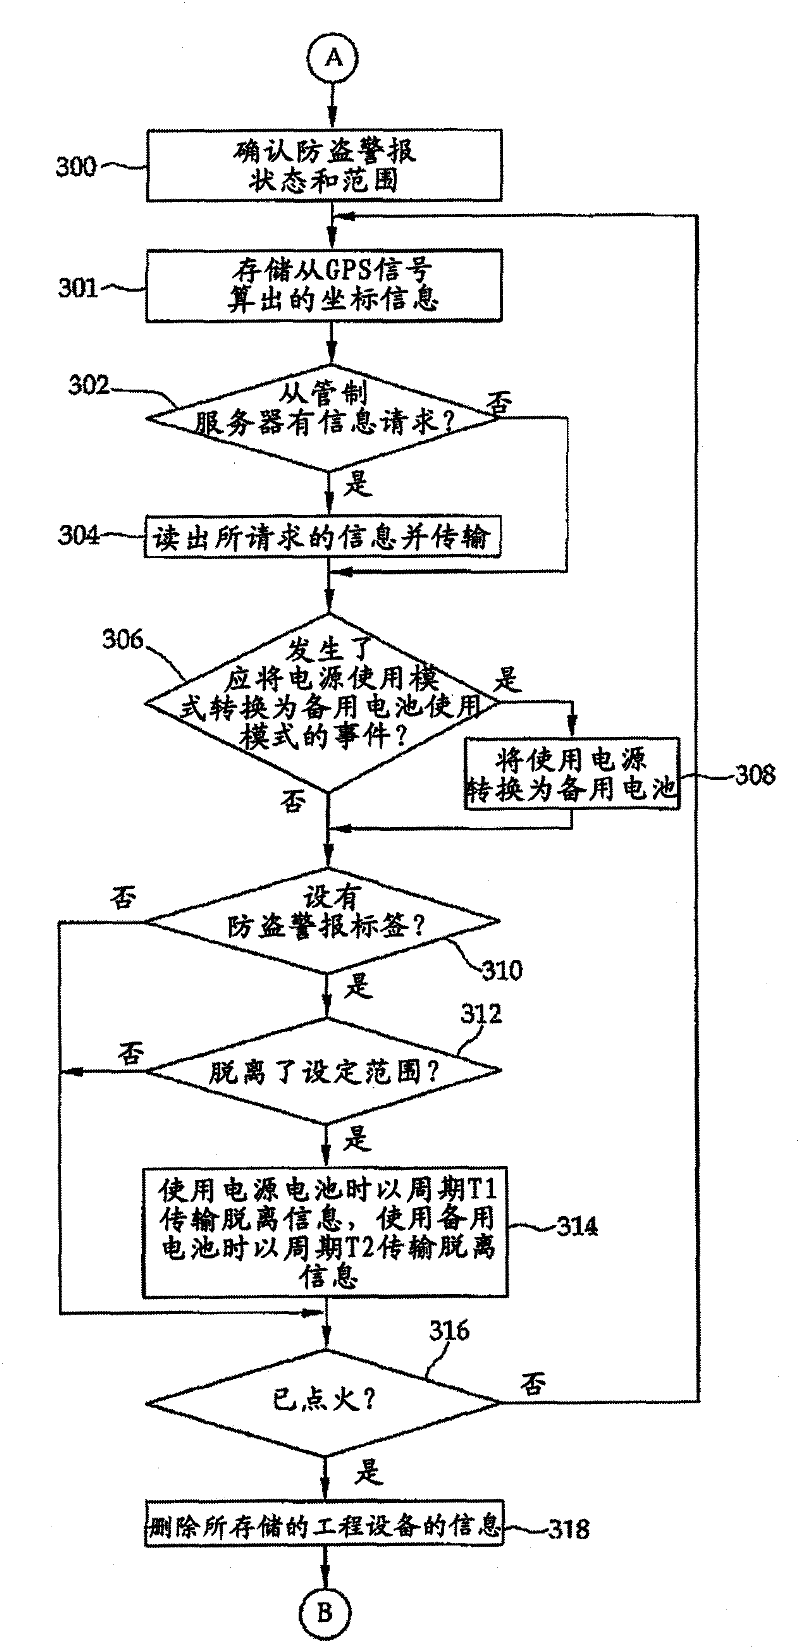 Engineering equipment information management system and method using communication terminal installed on engineering equipment